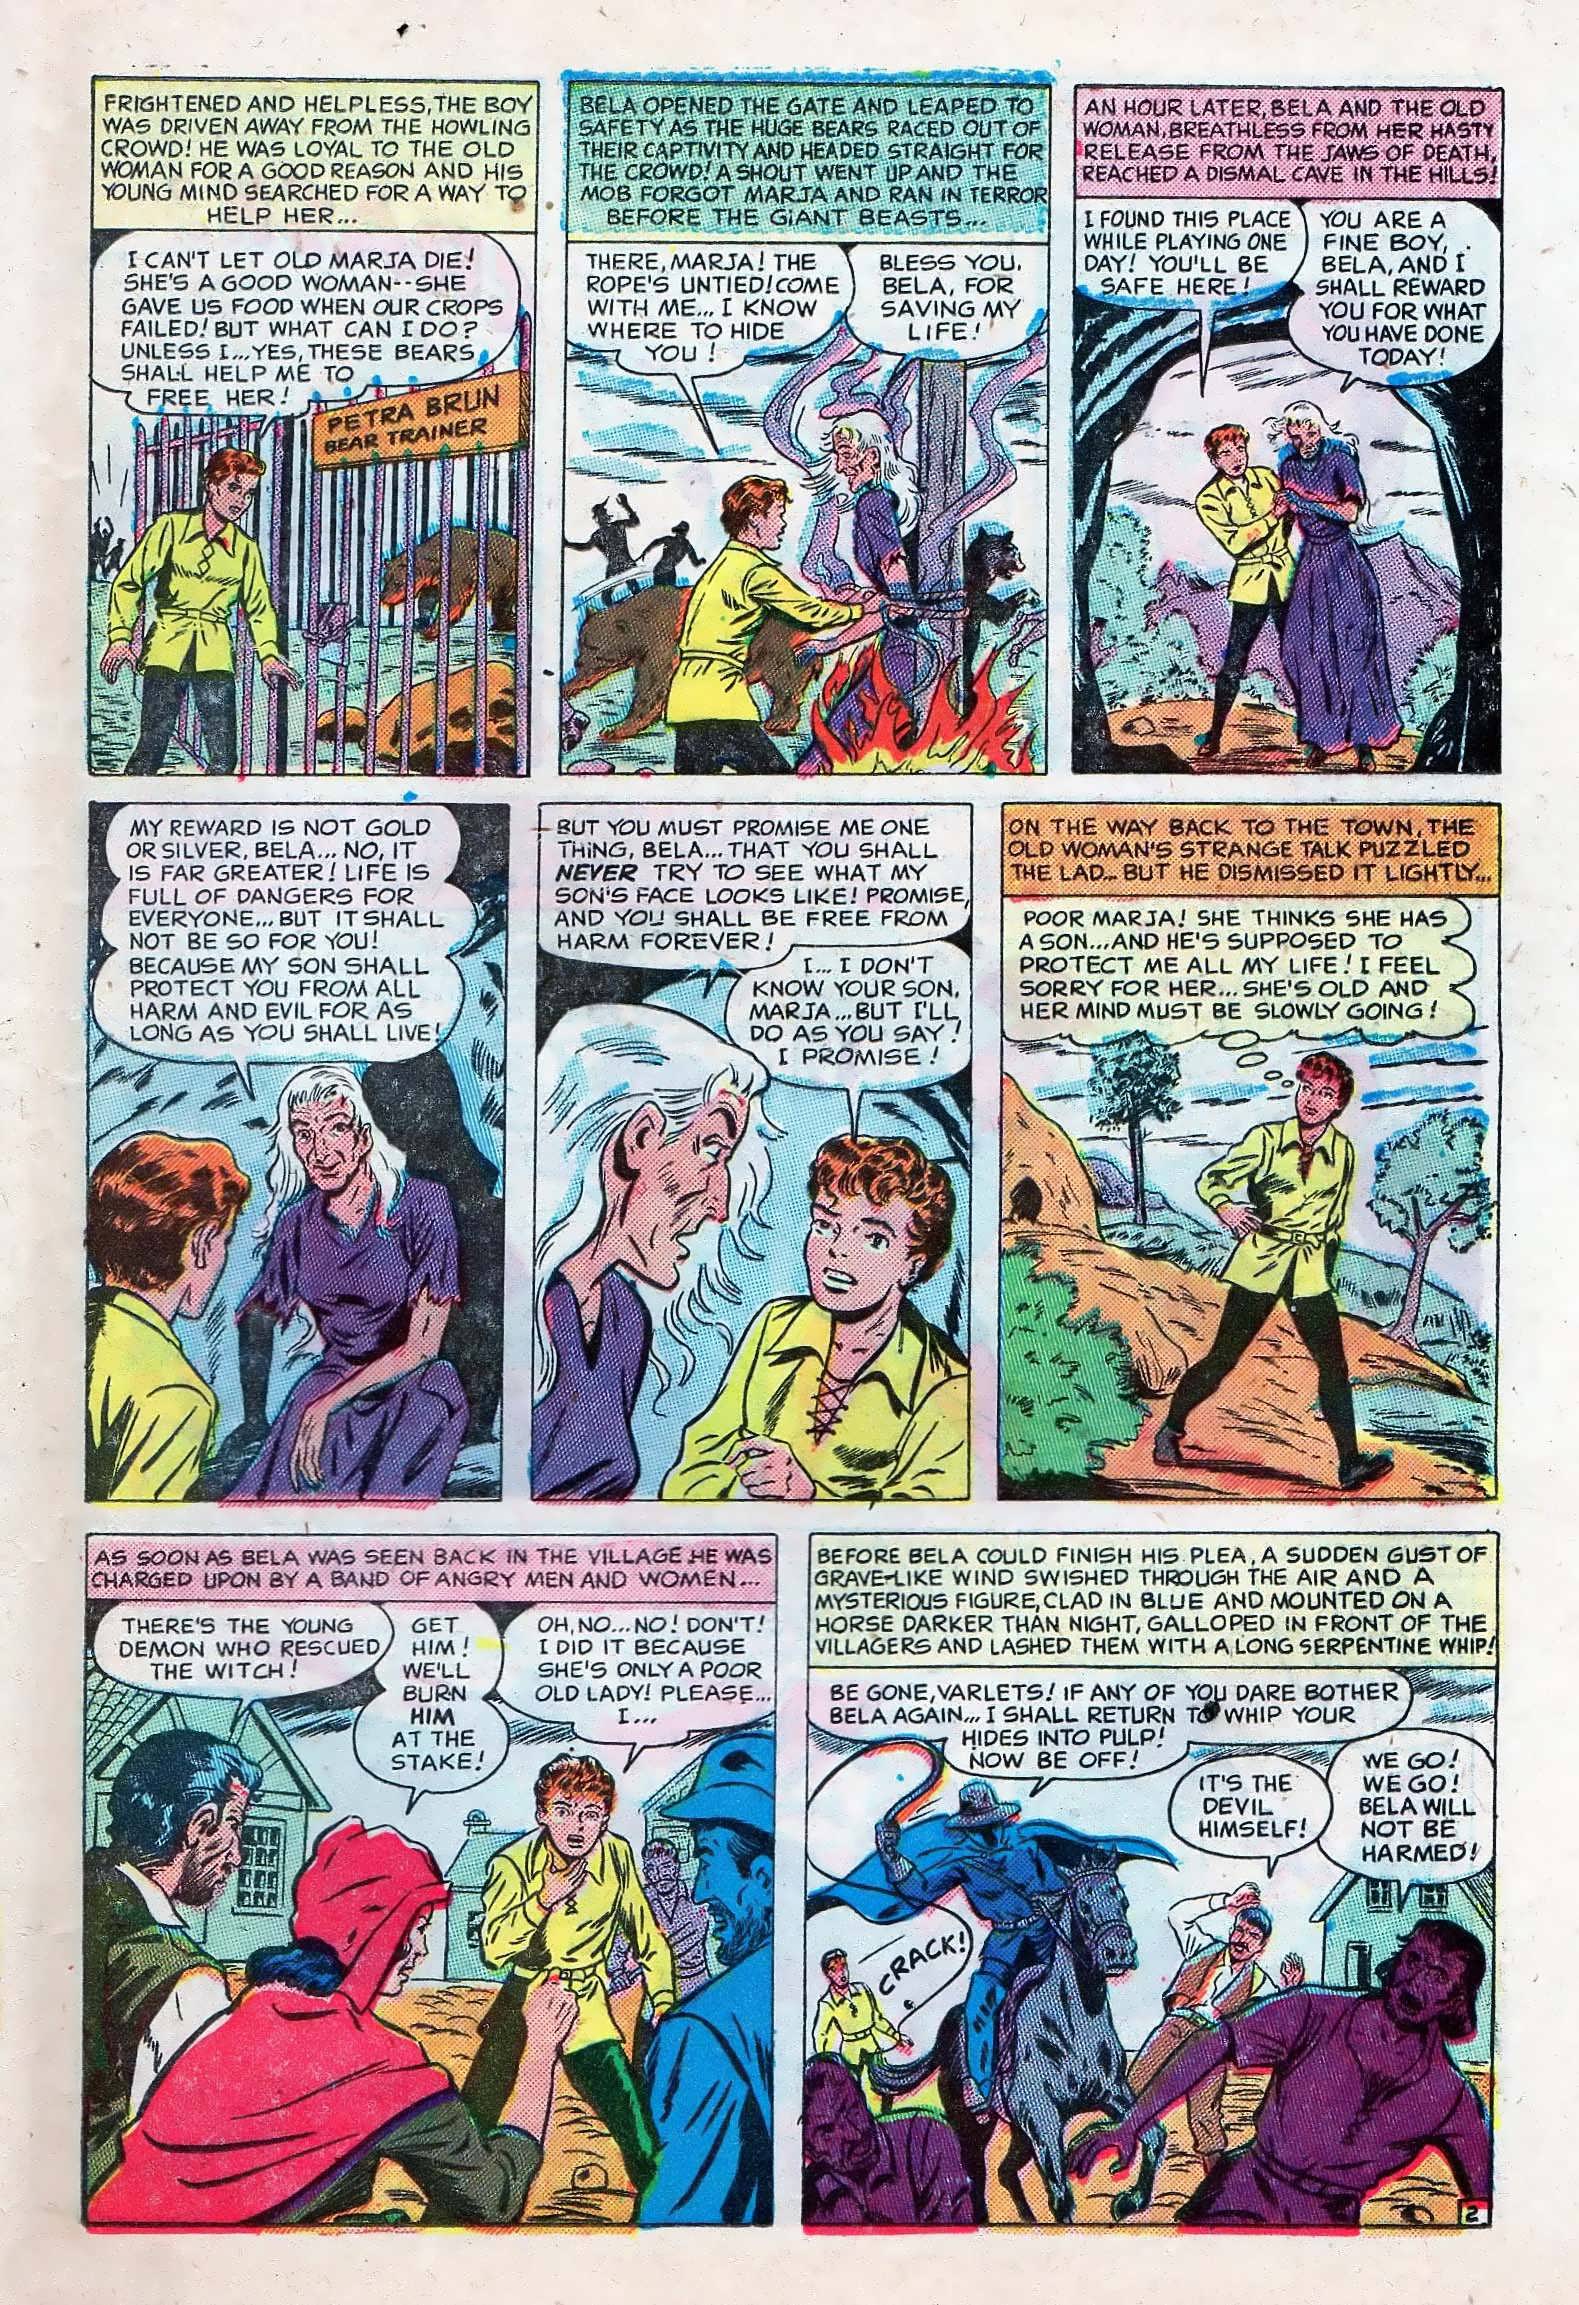 Marvel Tales (1949) 96 Page 36